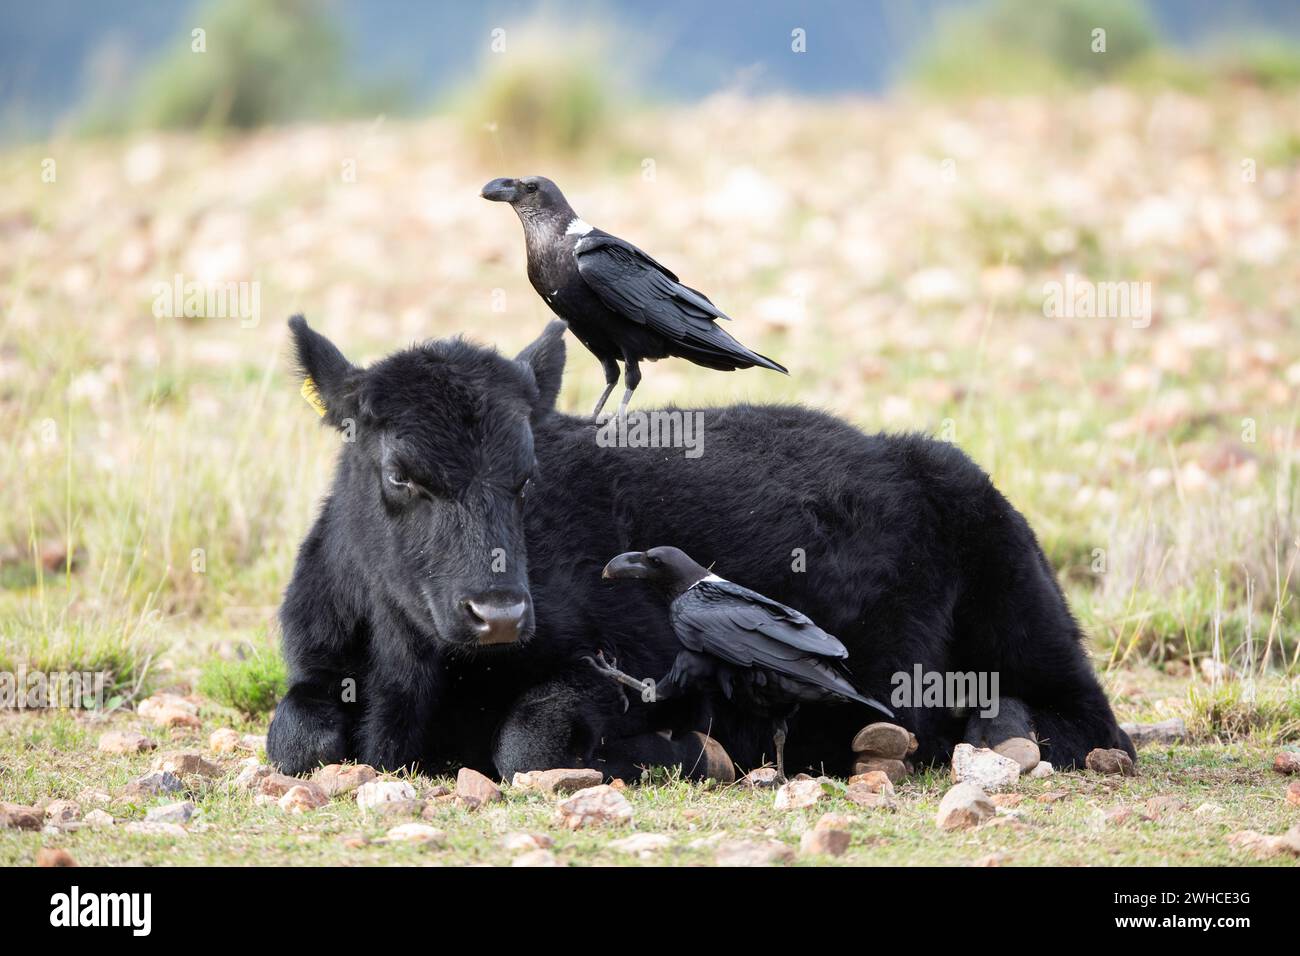 South Africa, Western Cape Province, Swartberg Pass, Domestic Cattle, Whitenecked Raven, Corvus albicollis, Nature Reserve, Symbiosis Stock Photo